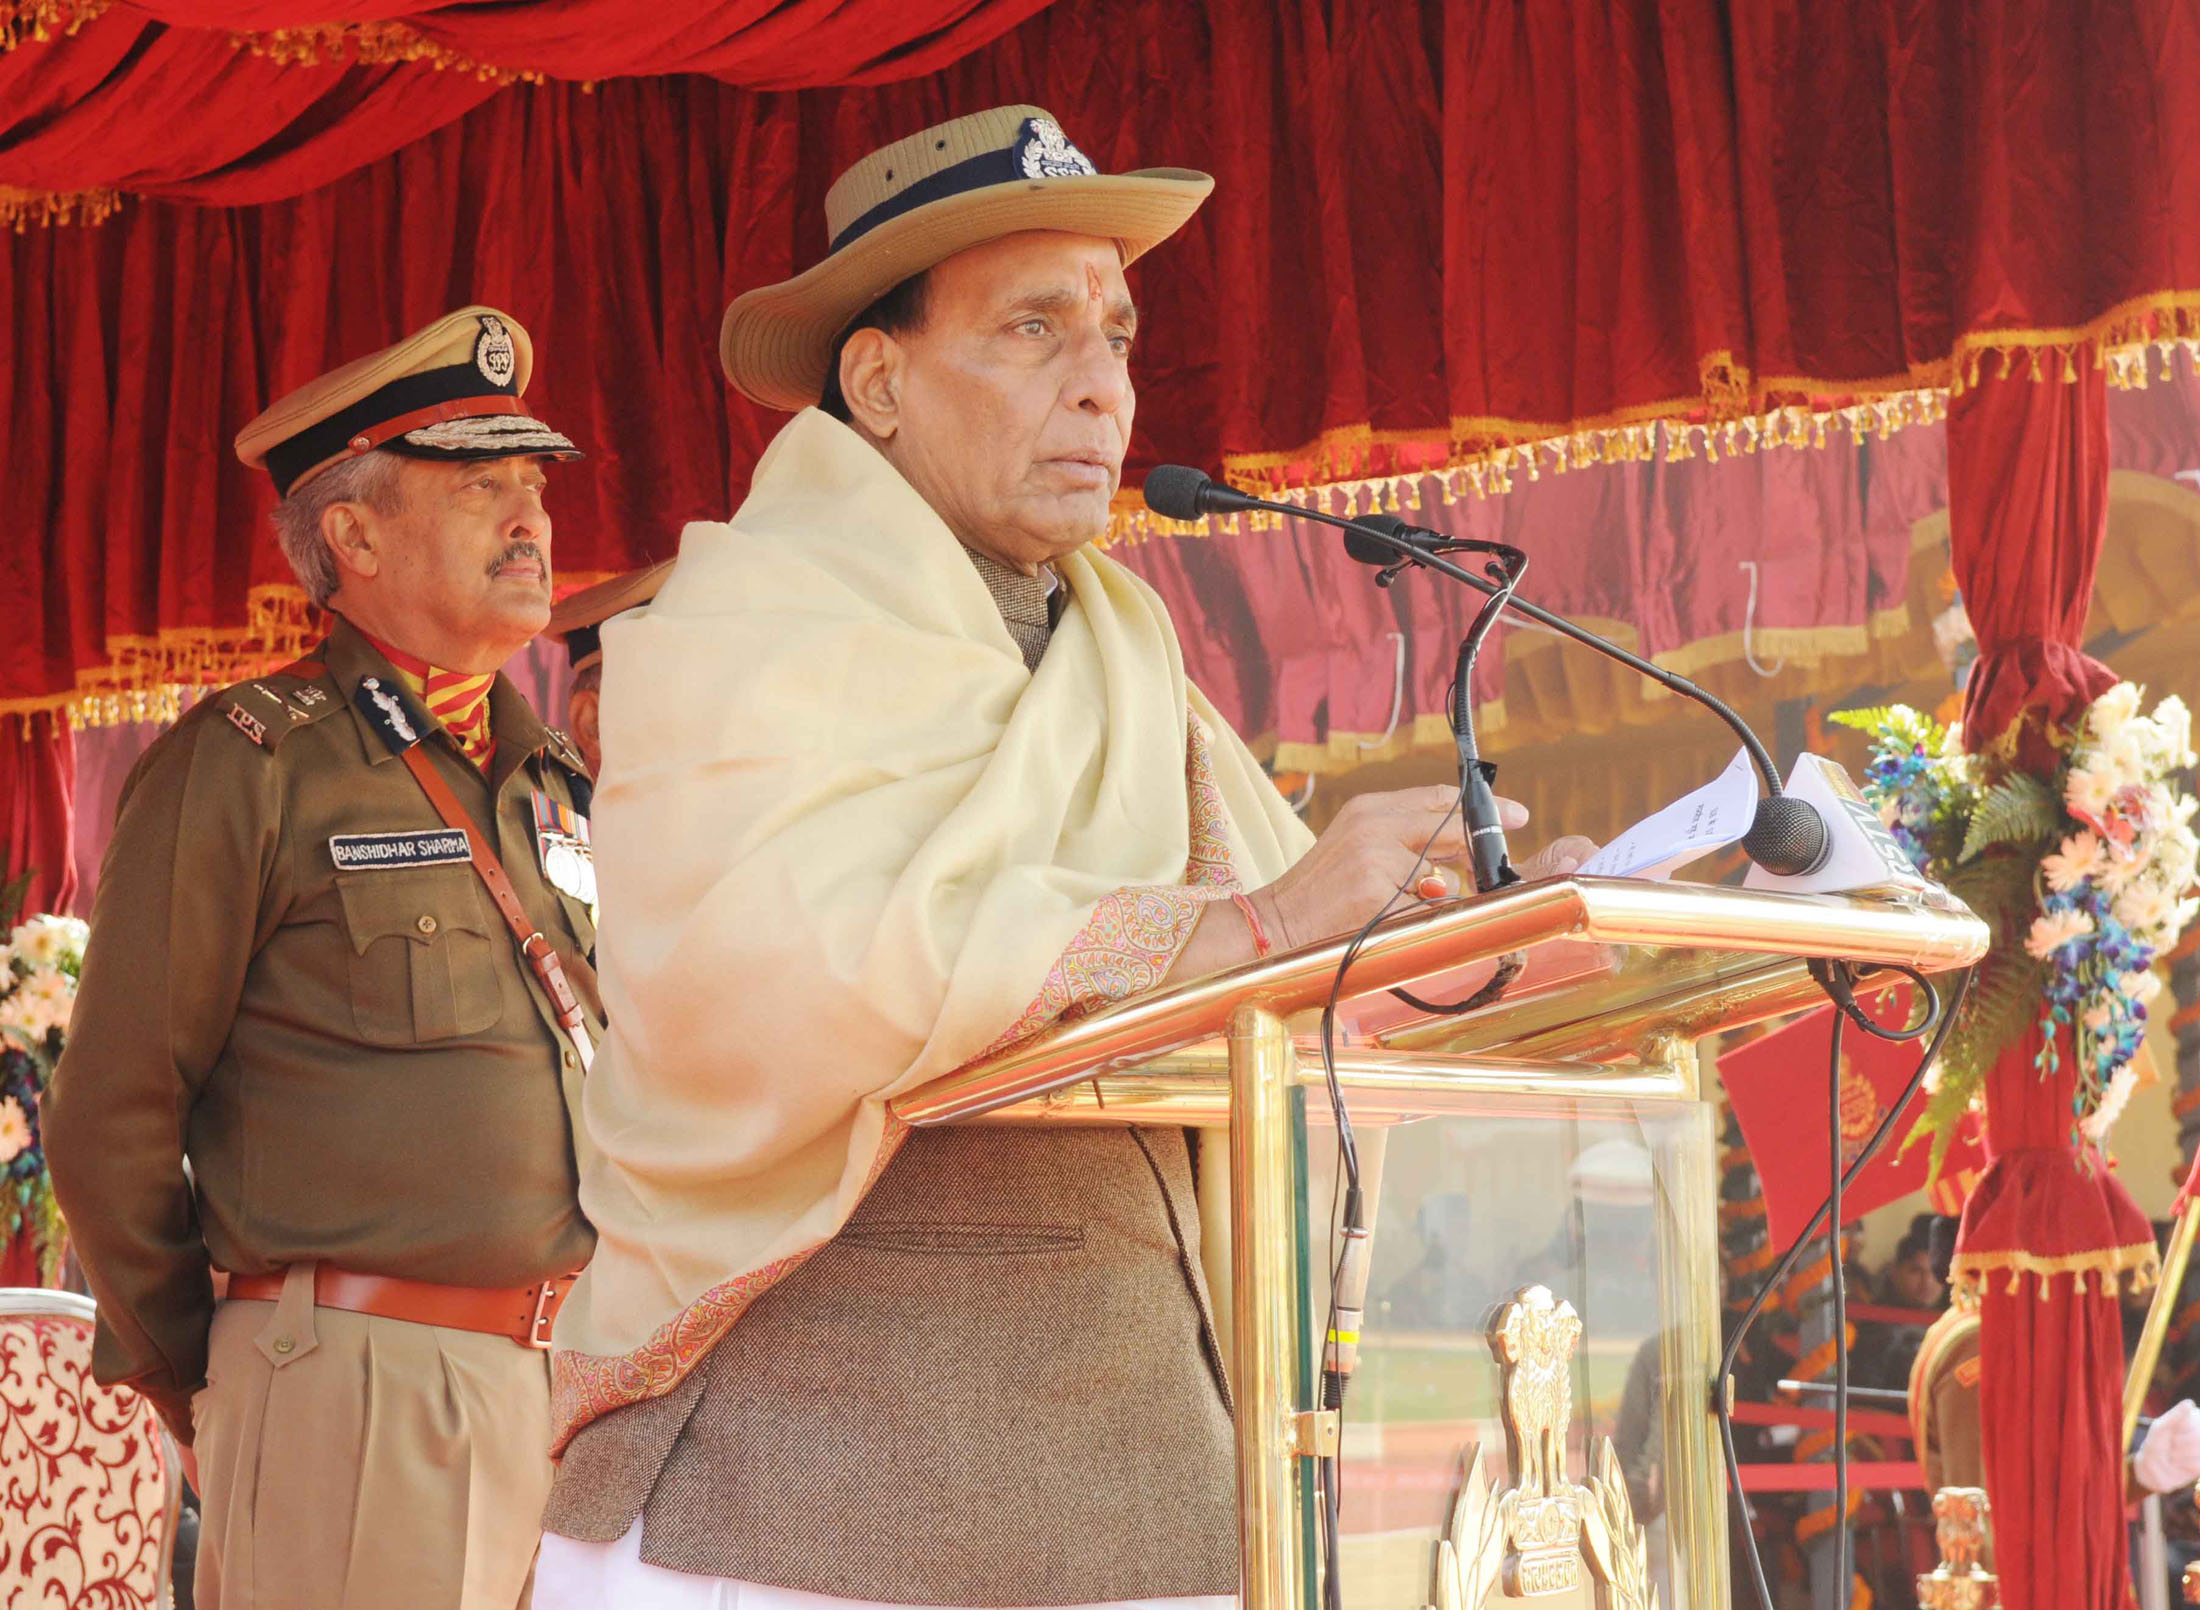 The Union Home Minister, Shri Rajnath Singh addressing at the 52nd anniversary parade of the Sashastra Seema Bal, in New Delhi on December 24, 2015.